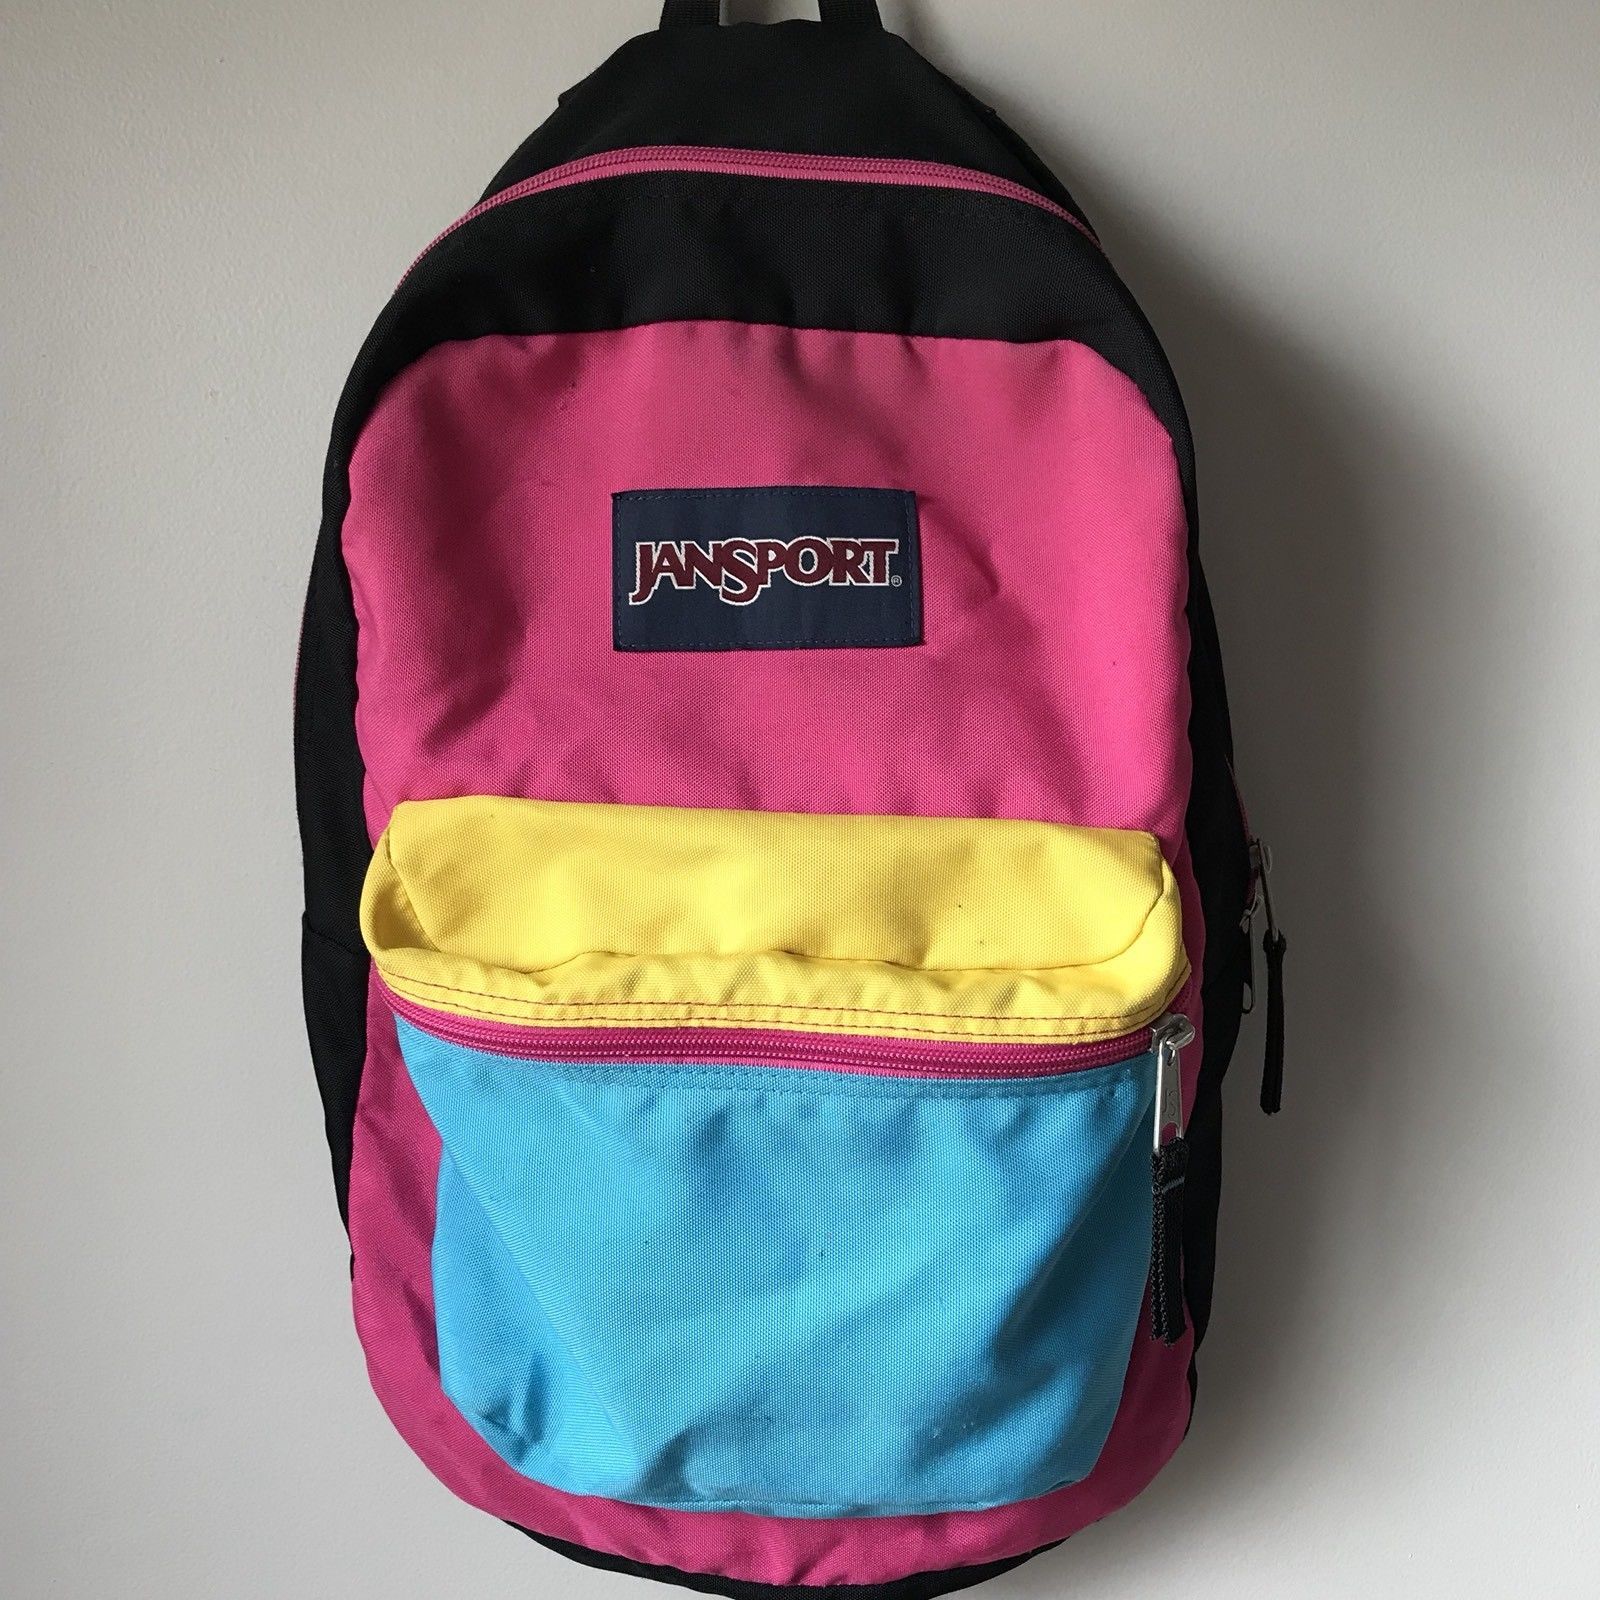 90s backpack